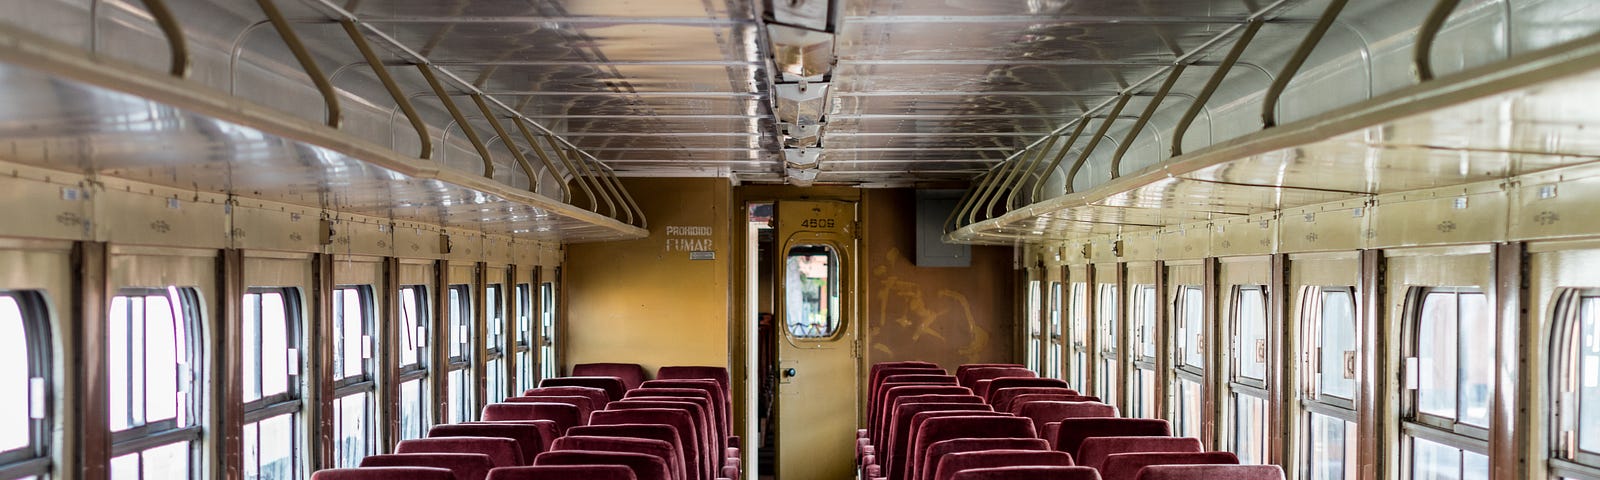 Inside of a train compartment